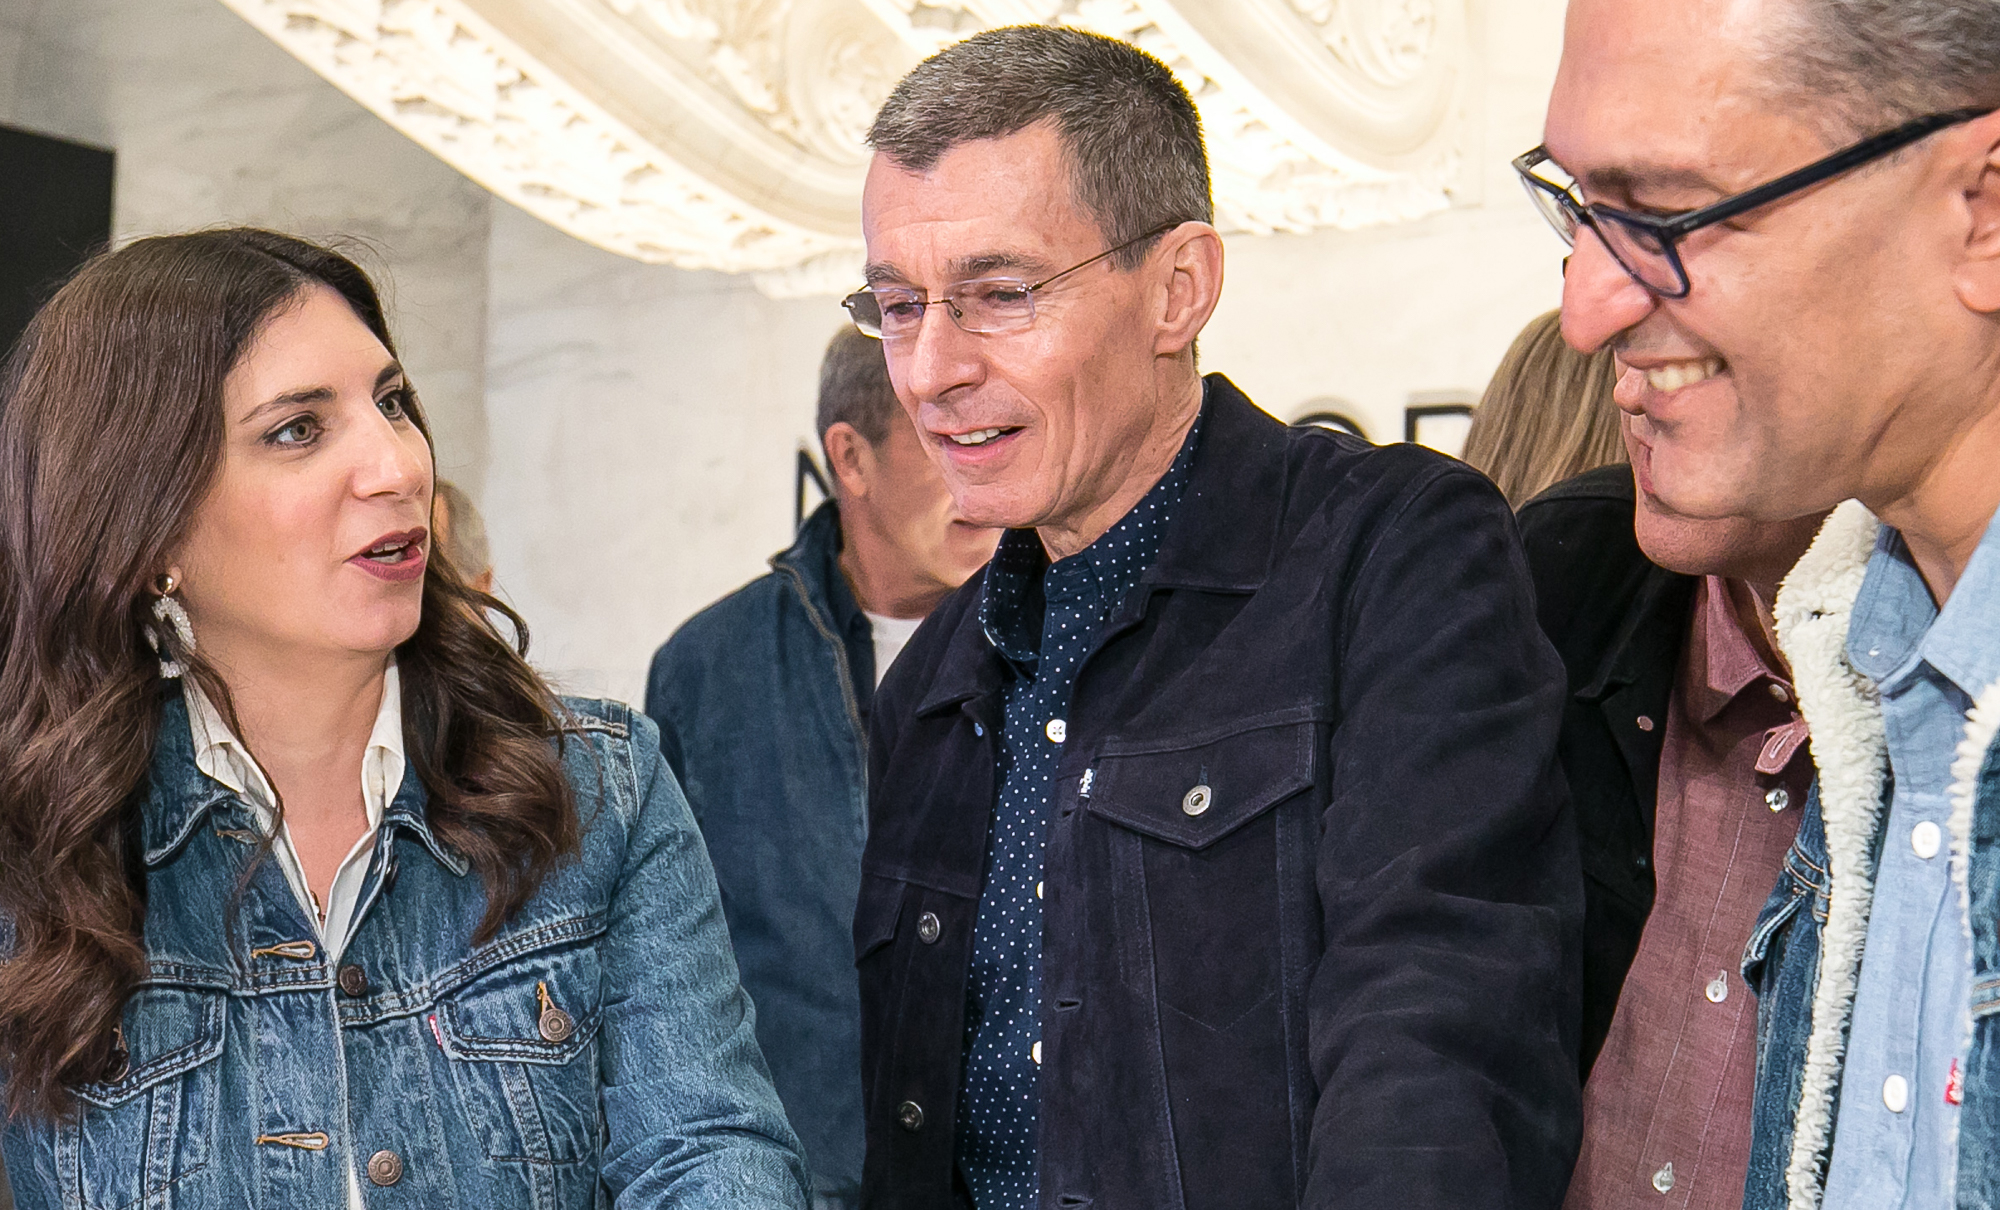 LS&Co. CEO Chip Bergh Named to Fortune’s ‘World’s Greatest Leaders’ List